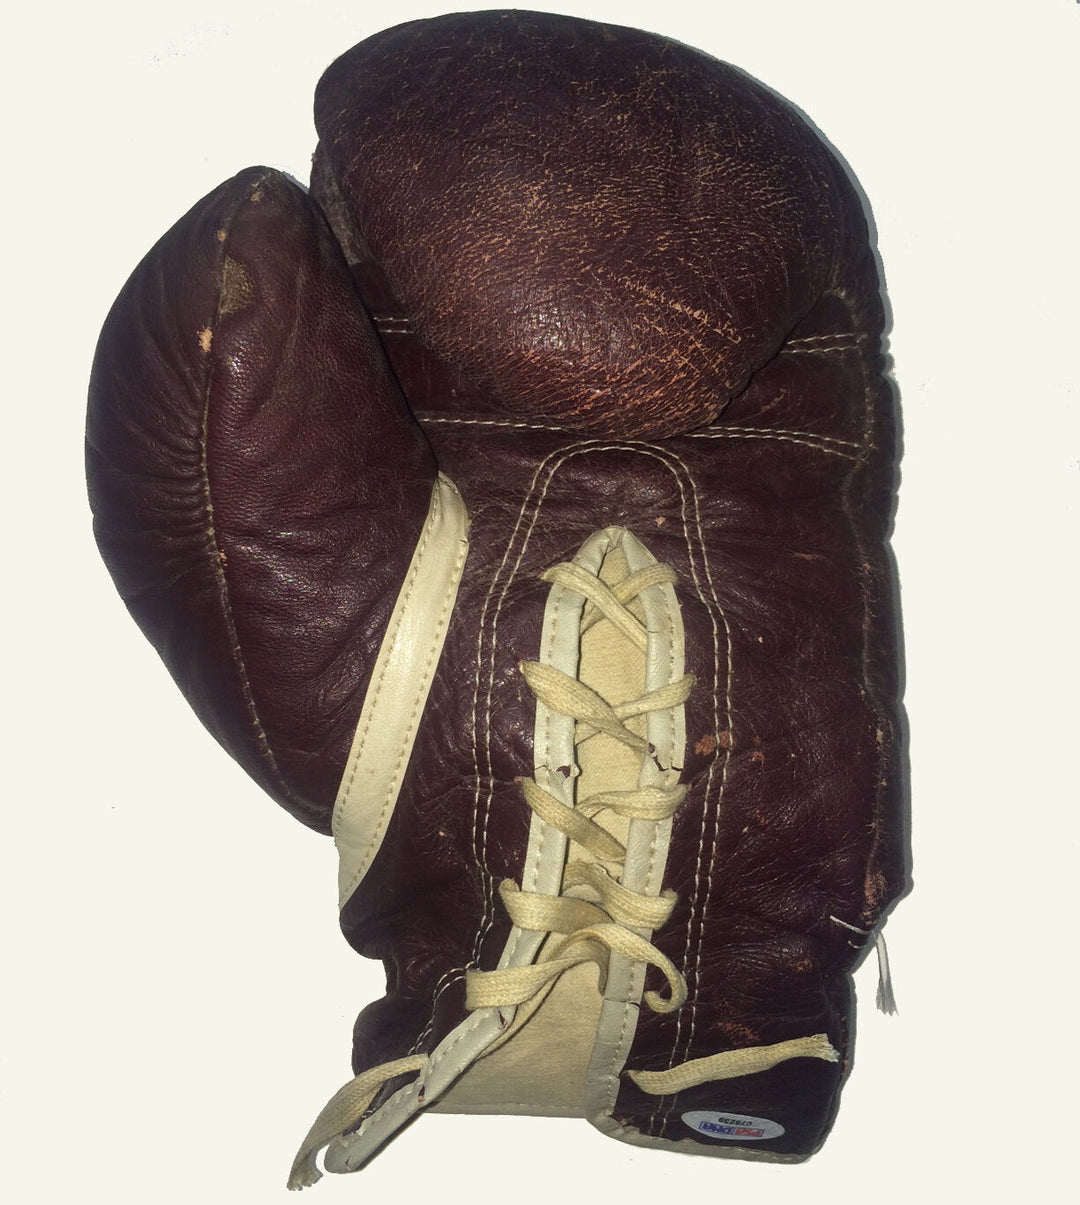 Muhammad Ali Signed Cassius Clay boxing glove Inscribed w/ Drawings 1/1 PSA auto Image 4